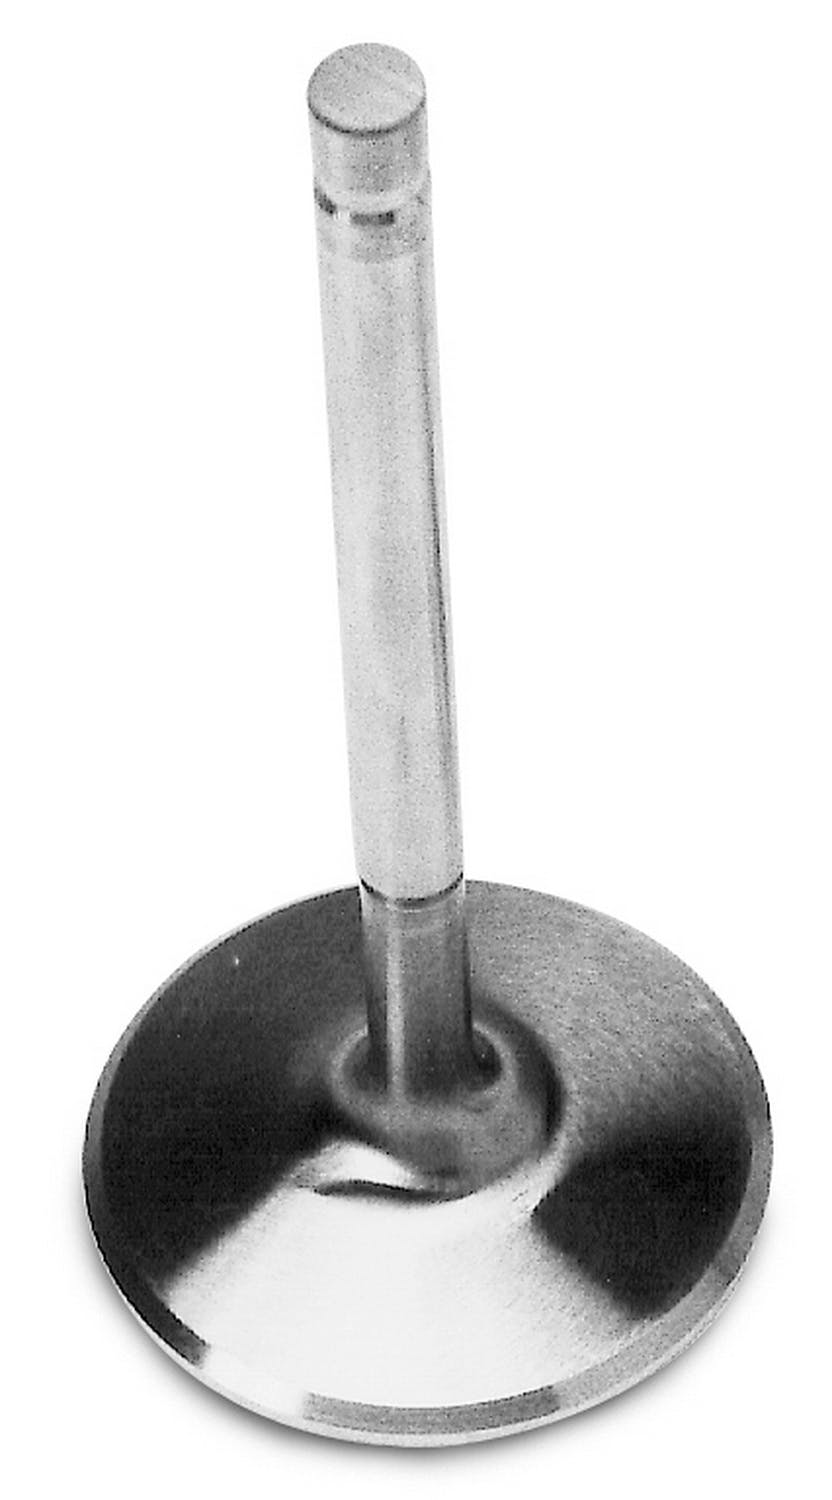 Edelbrock 9760 Intake Valve for 60989, AMC, S/B Chevy and Ford Heads